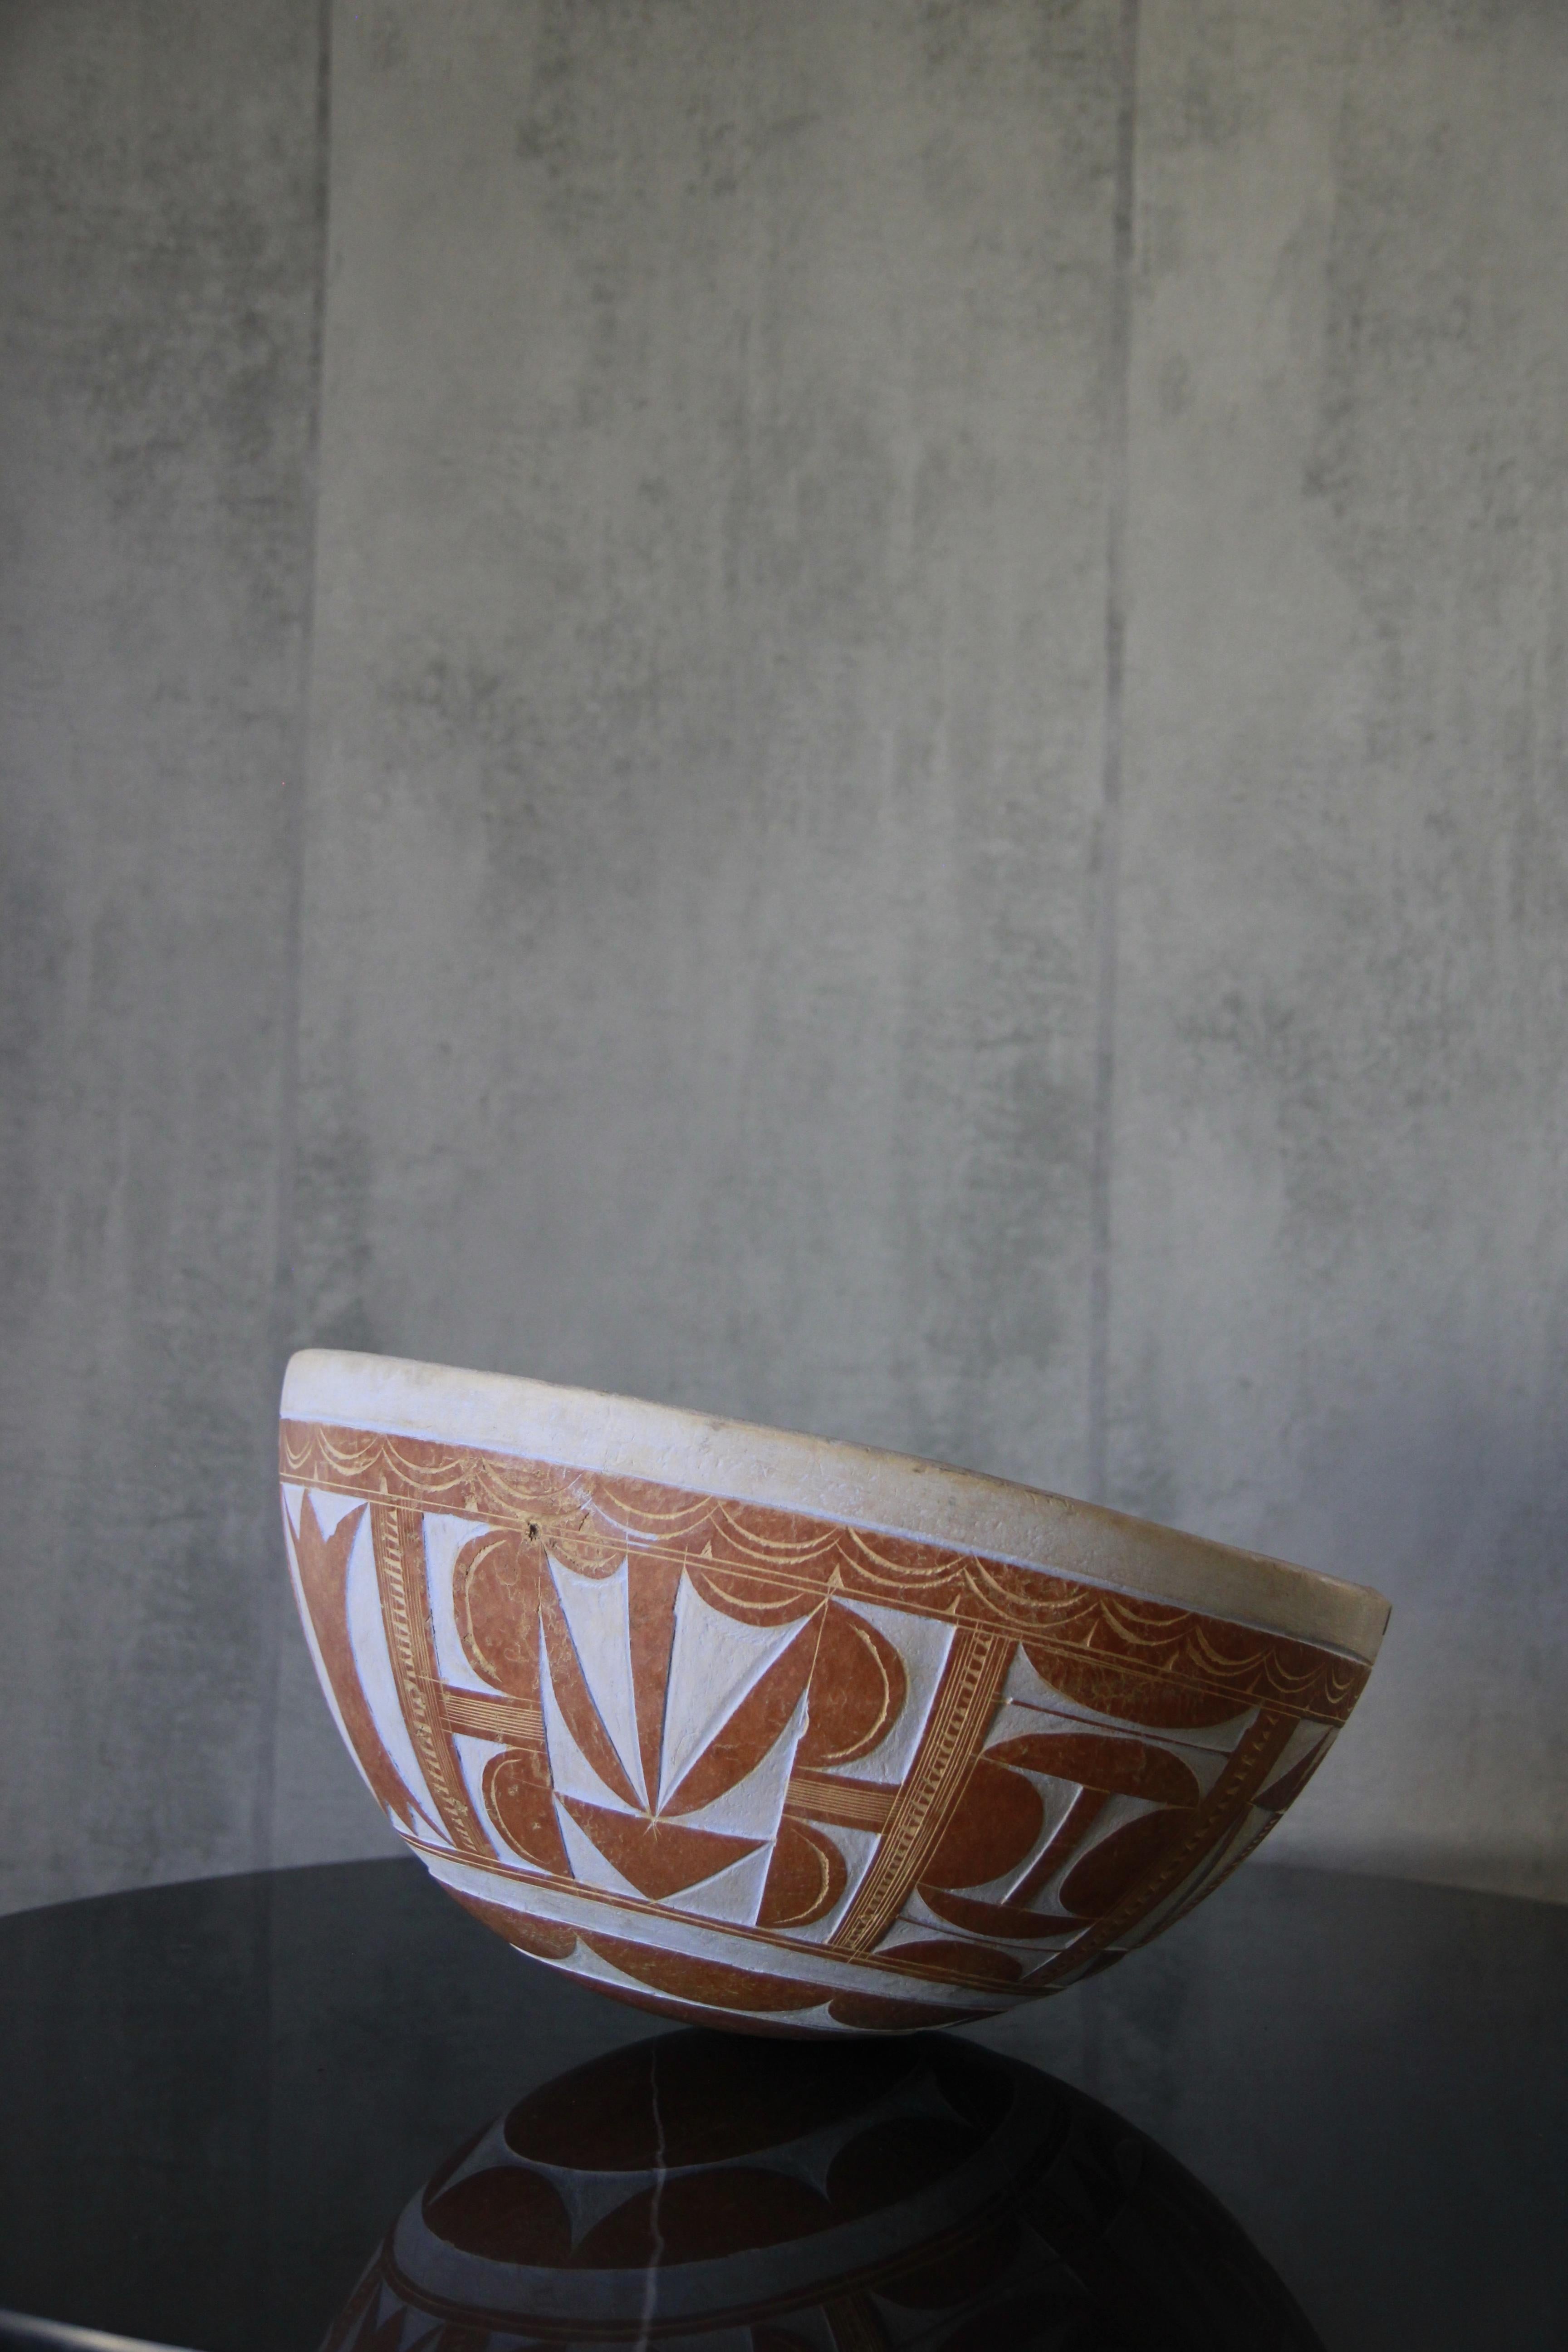 Hand-carved and beautifully crafted natural Calabash gourd bowl, made by artisans in West Africa with gorgeous tribal geometric pattern. The calabash gourd is hollowed out, dried and hand crafted. The bowl is extremely light. It can be use for